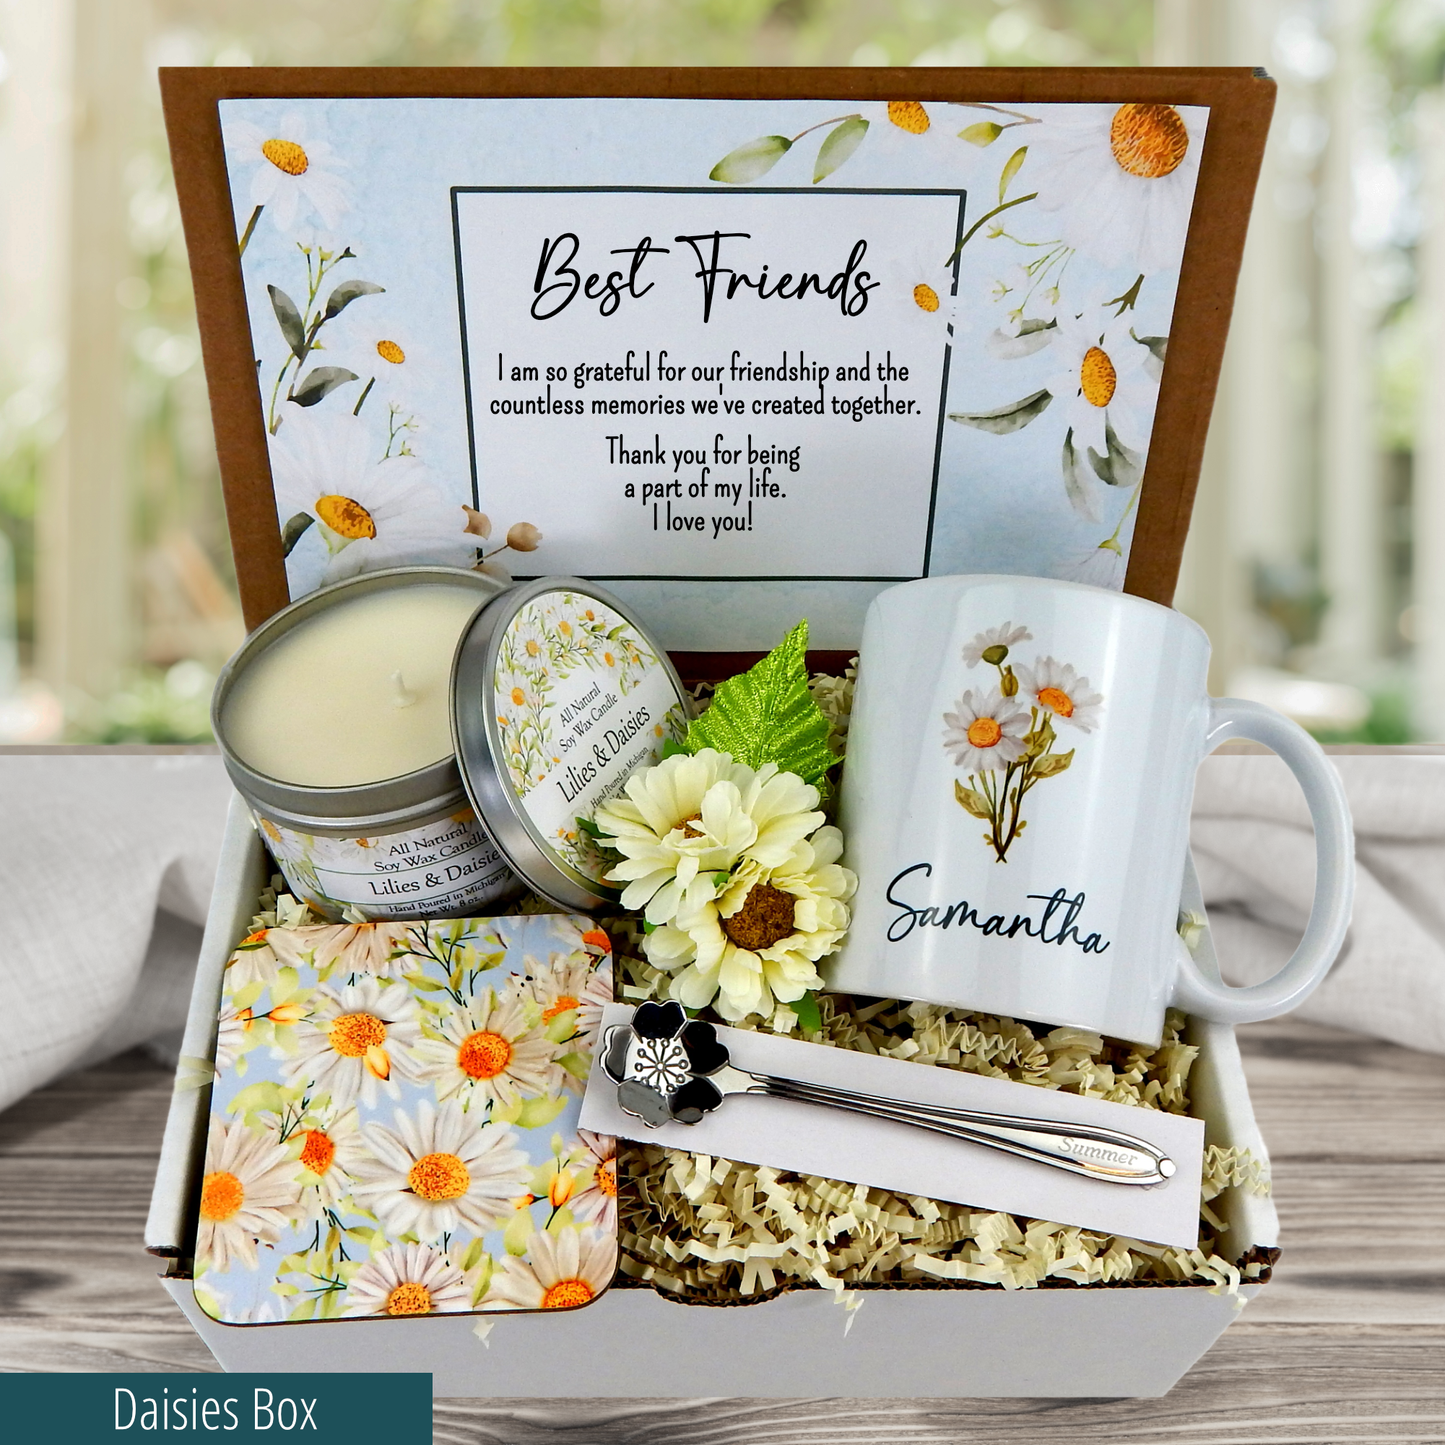 Thinking of You and Your Friendship: Personalized Gift Basket Delight